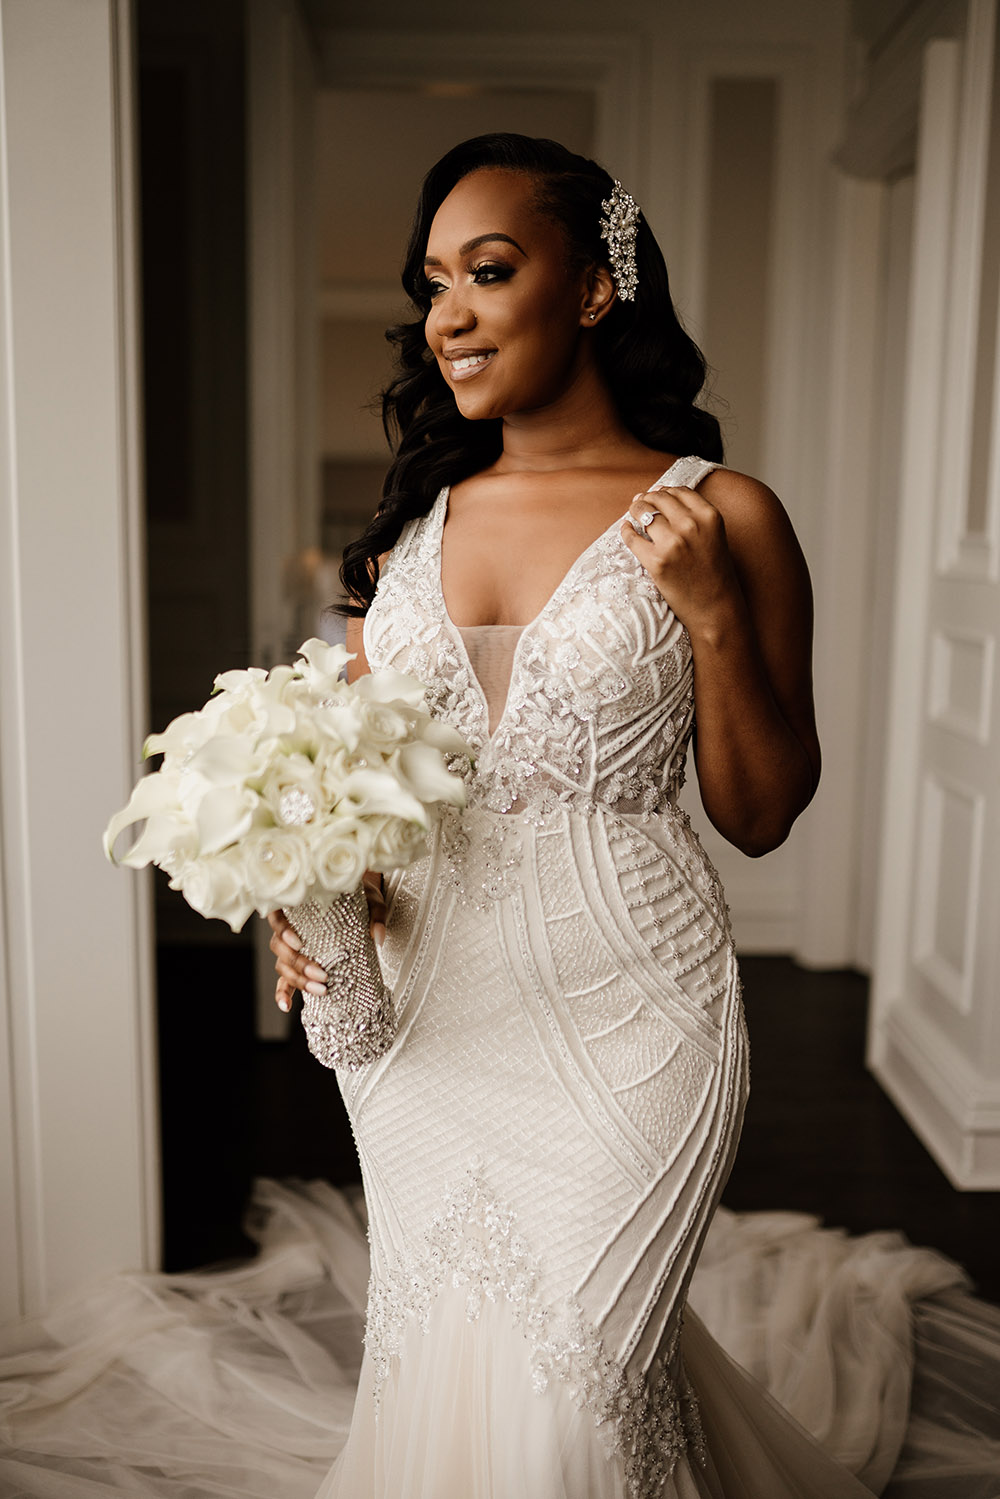 Shemia wore a beautiful Badgley Mischka gown and carried a bouquet of white roses and lilies. | Photo by Audie Jackson